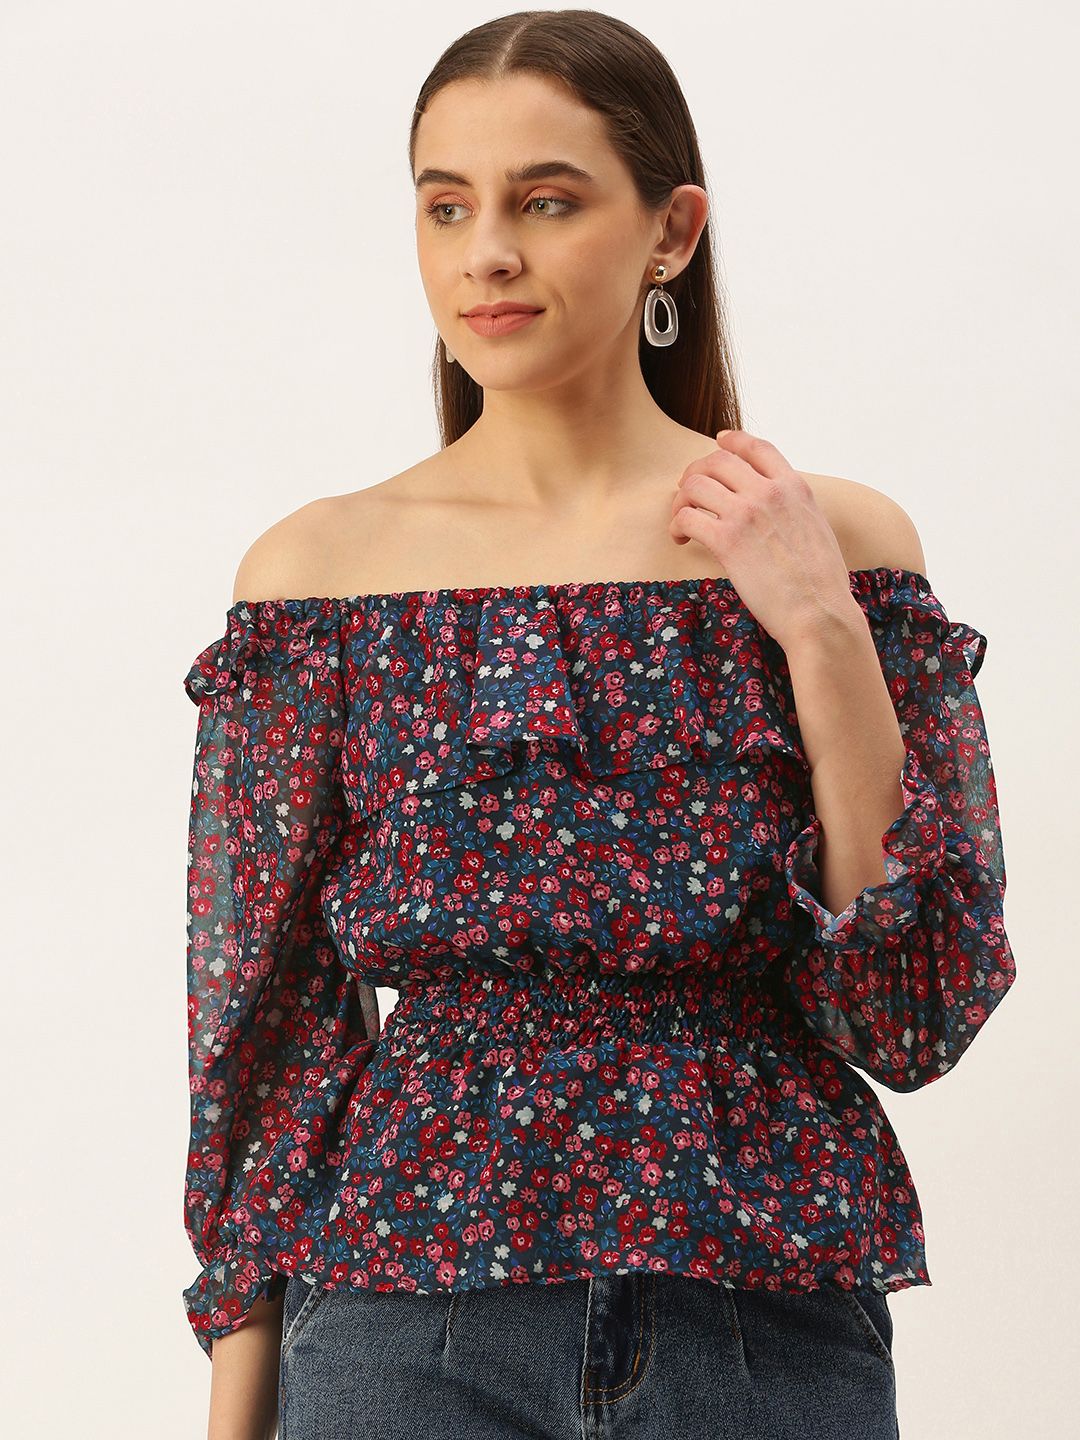 MELOSO Navy Blue & Red Floral Print Off-Shoulder Georgette Cinched Waist Top Price in India